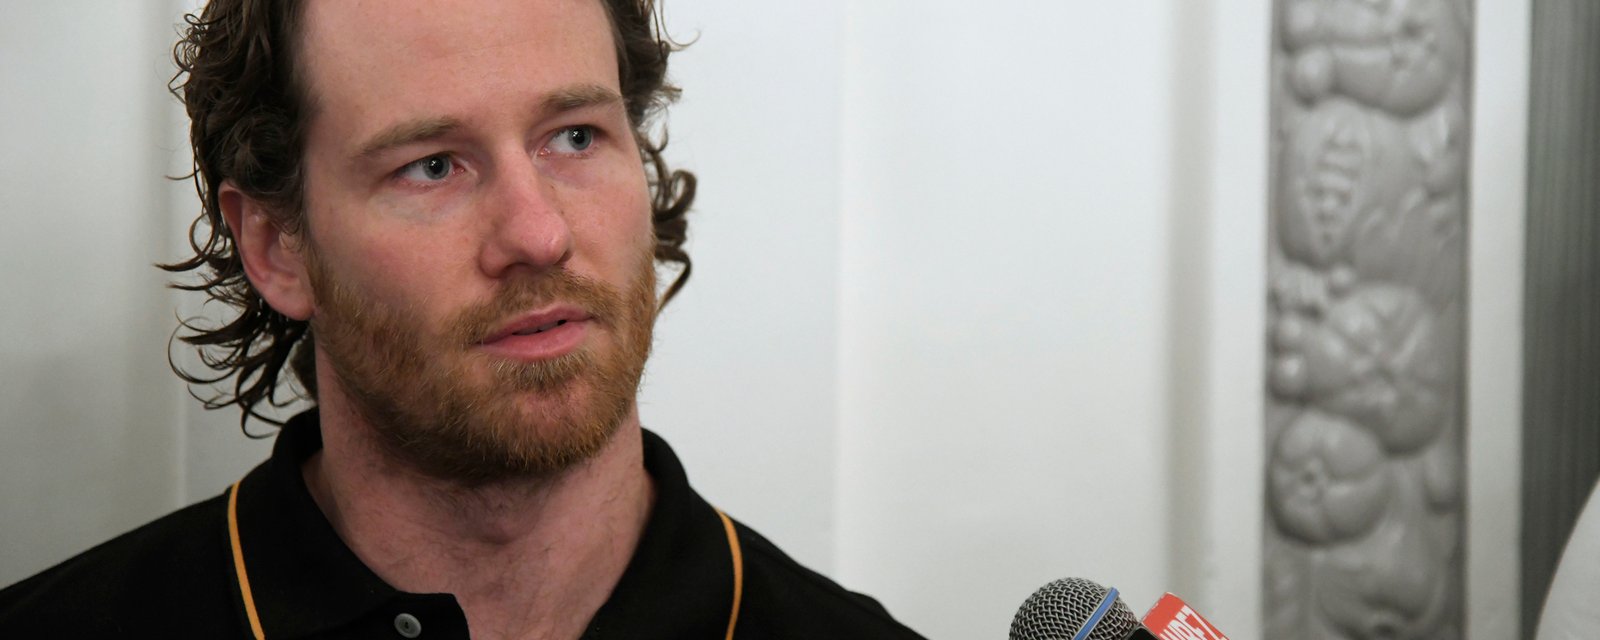 Duncan Keith gets mad at reporters for role in Hawks’ rebuild 